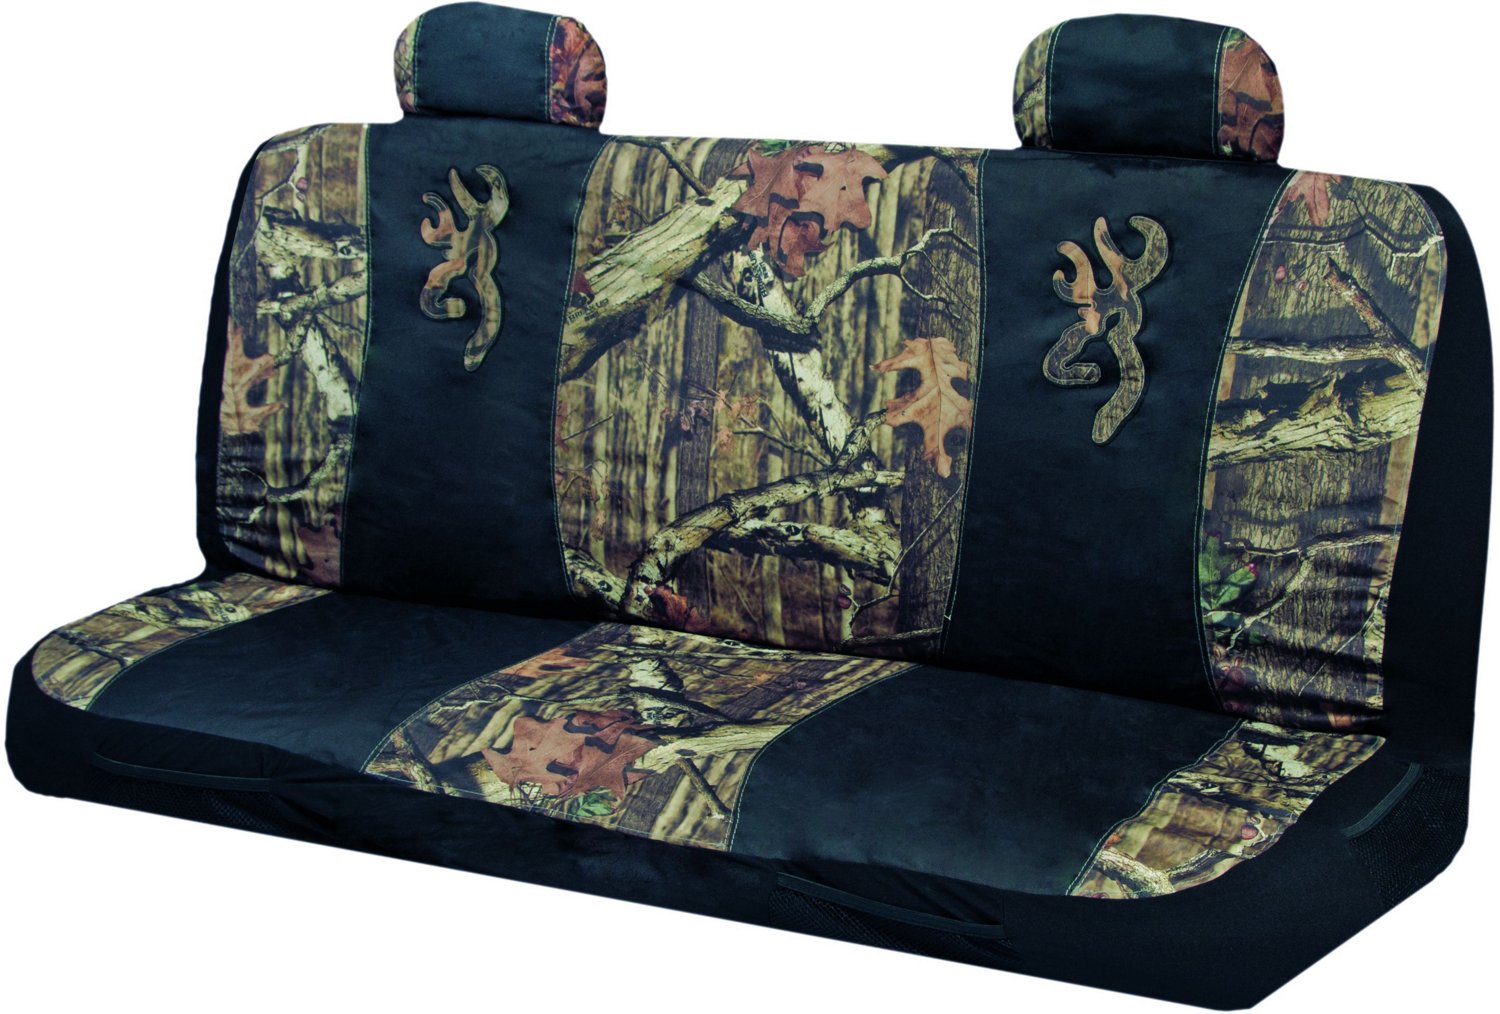 Camo jeep bench seat cover #1